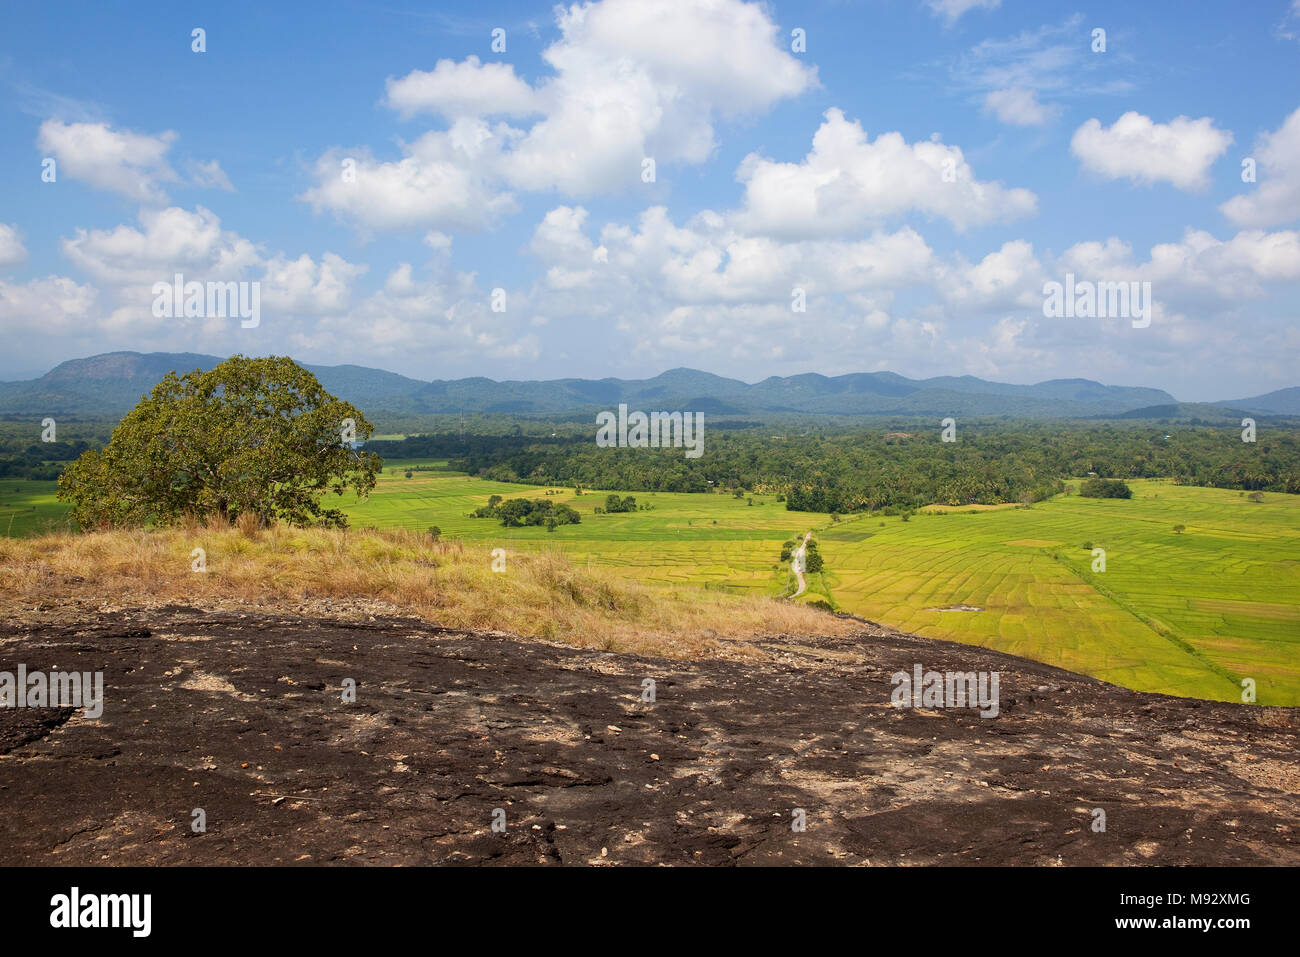 wasgamuwa national park viewed from a volcanic rock formation overlooking tropcal forest and rice paddies under a blue cloudy sky in sri lanka Stock Photo